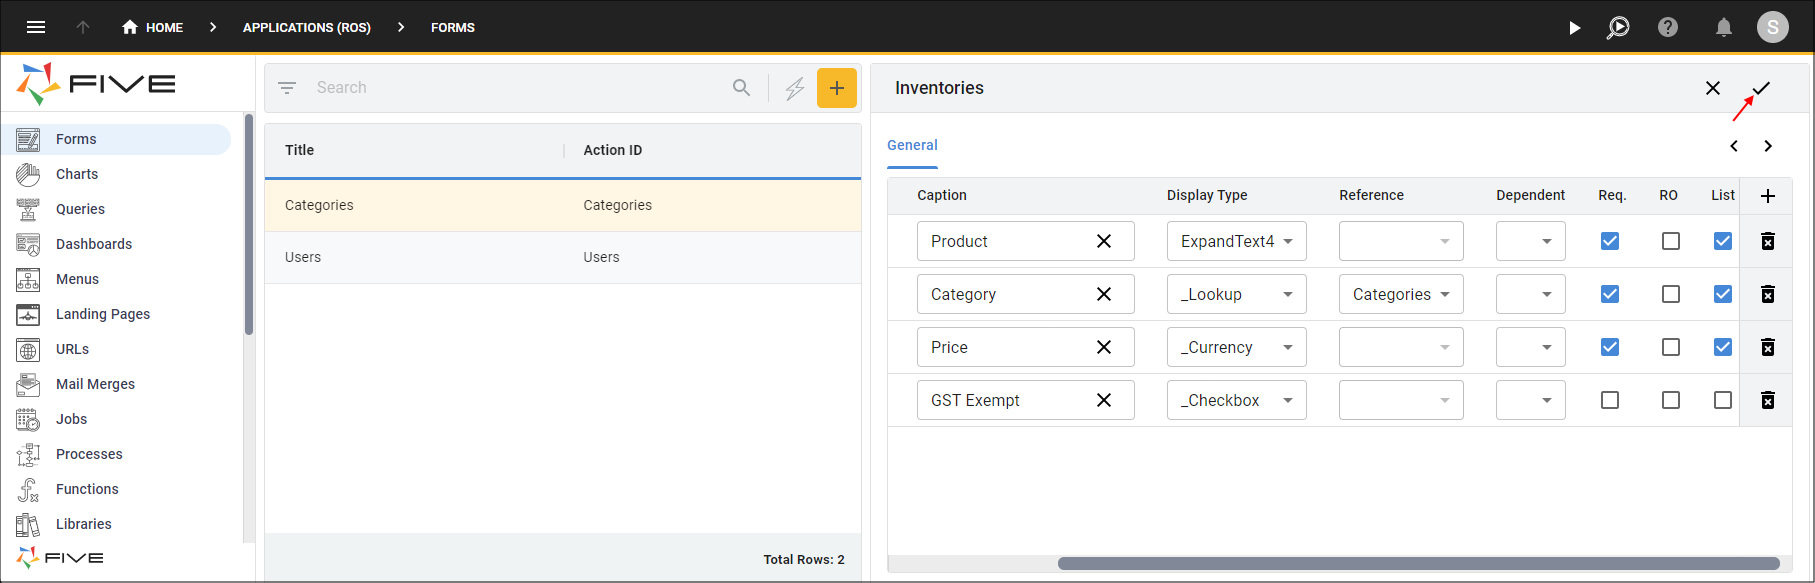 Configure the Fields and Save the Inventories Form